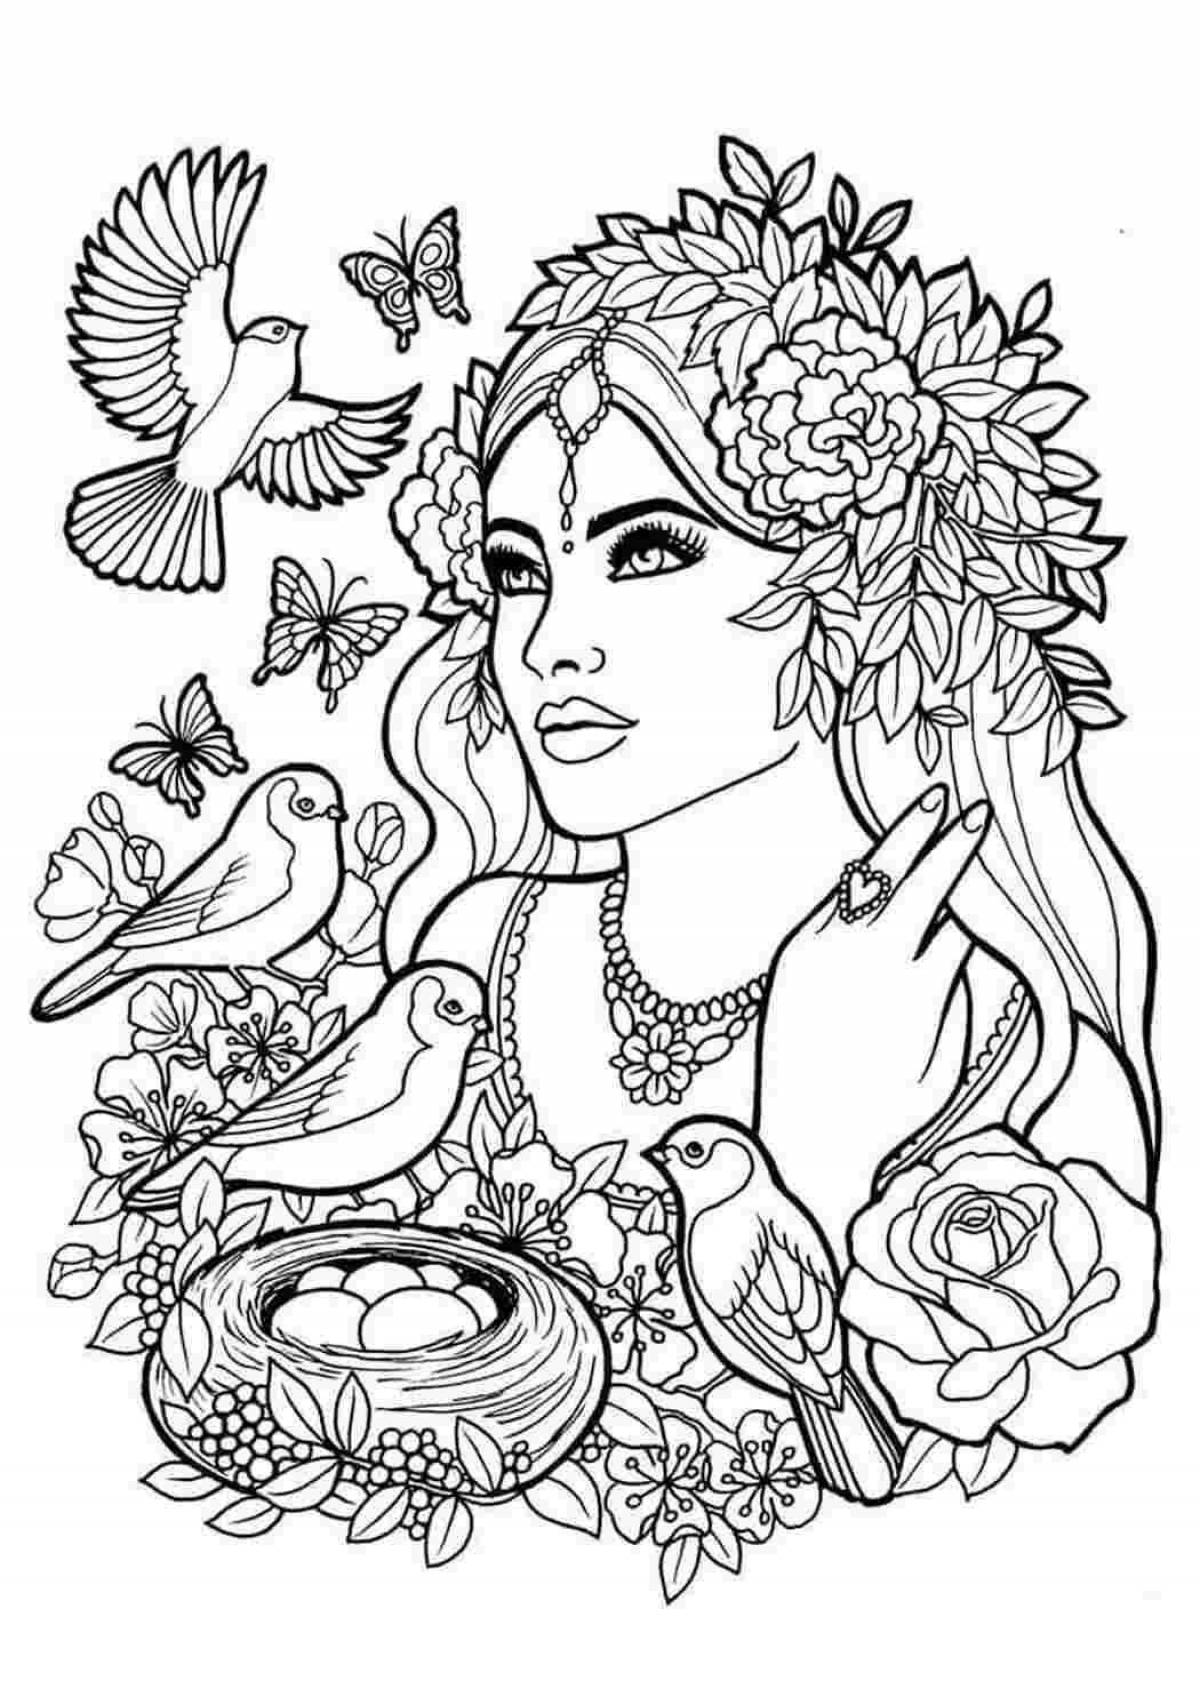 Attractive anti-stress coloring book for women